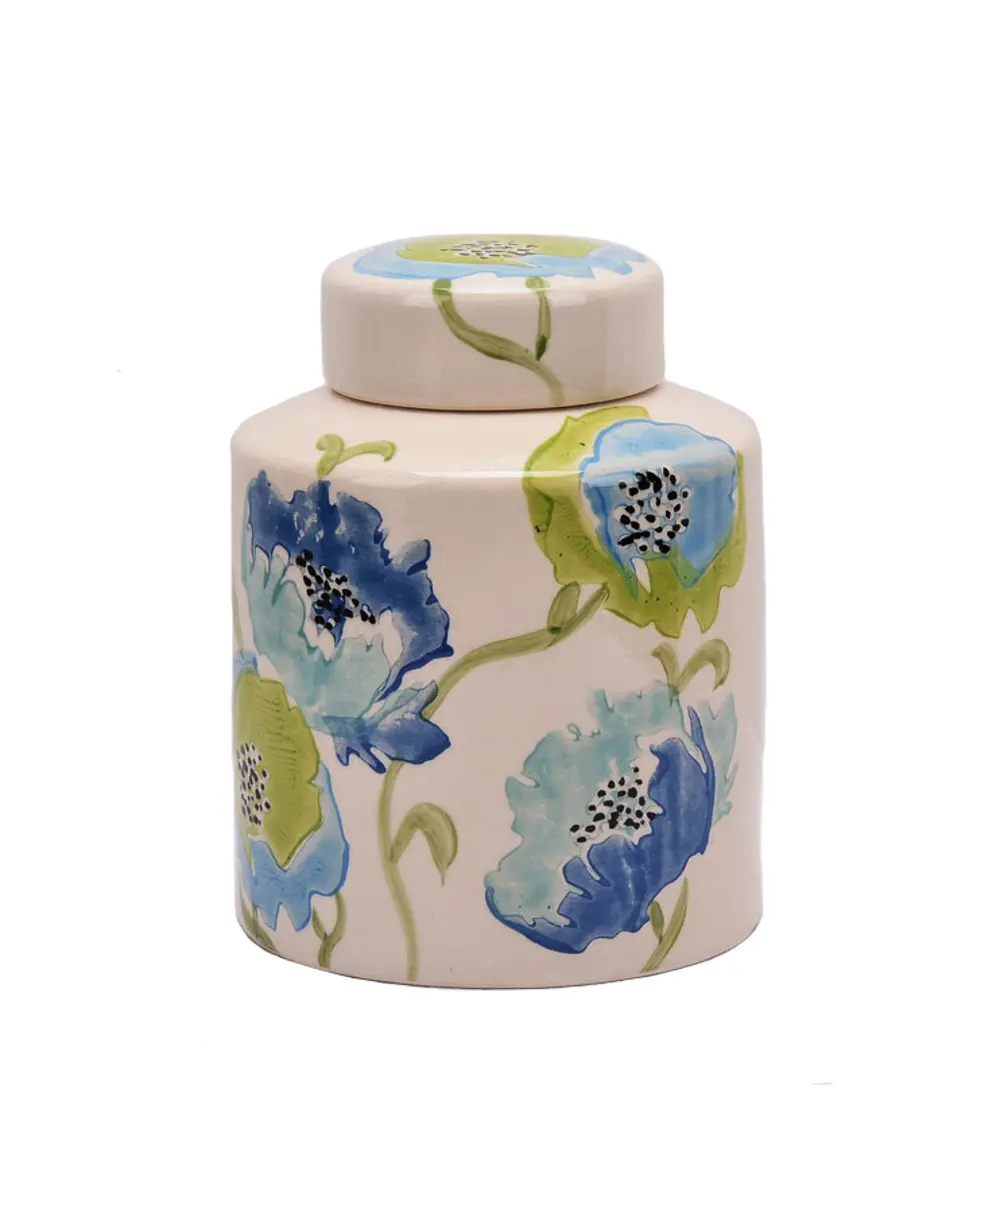 Blue and Green Poppies Ceramic Lidded Jar-1